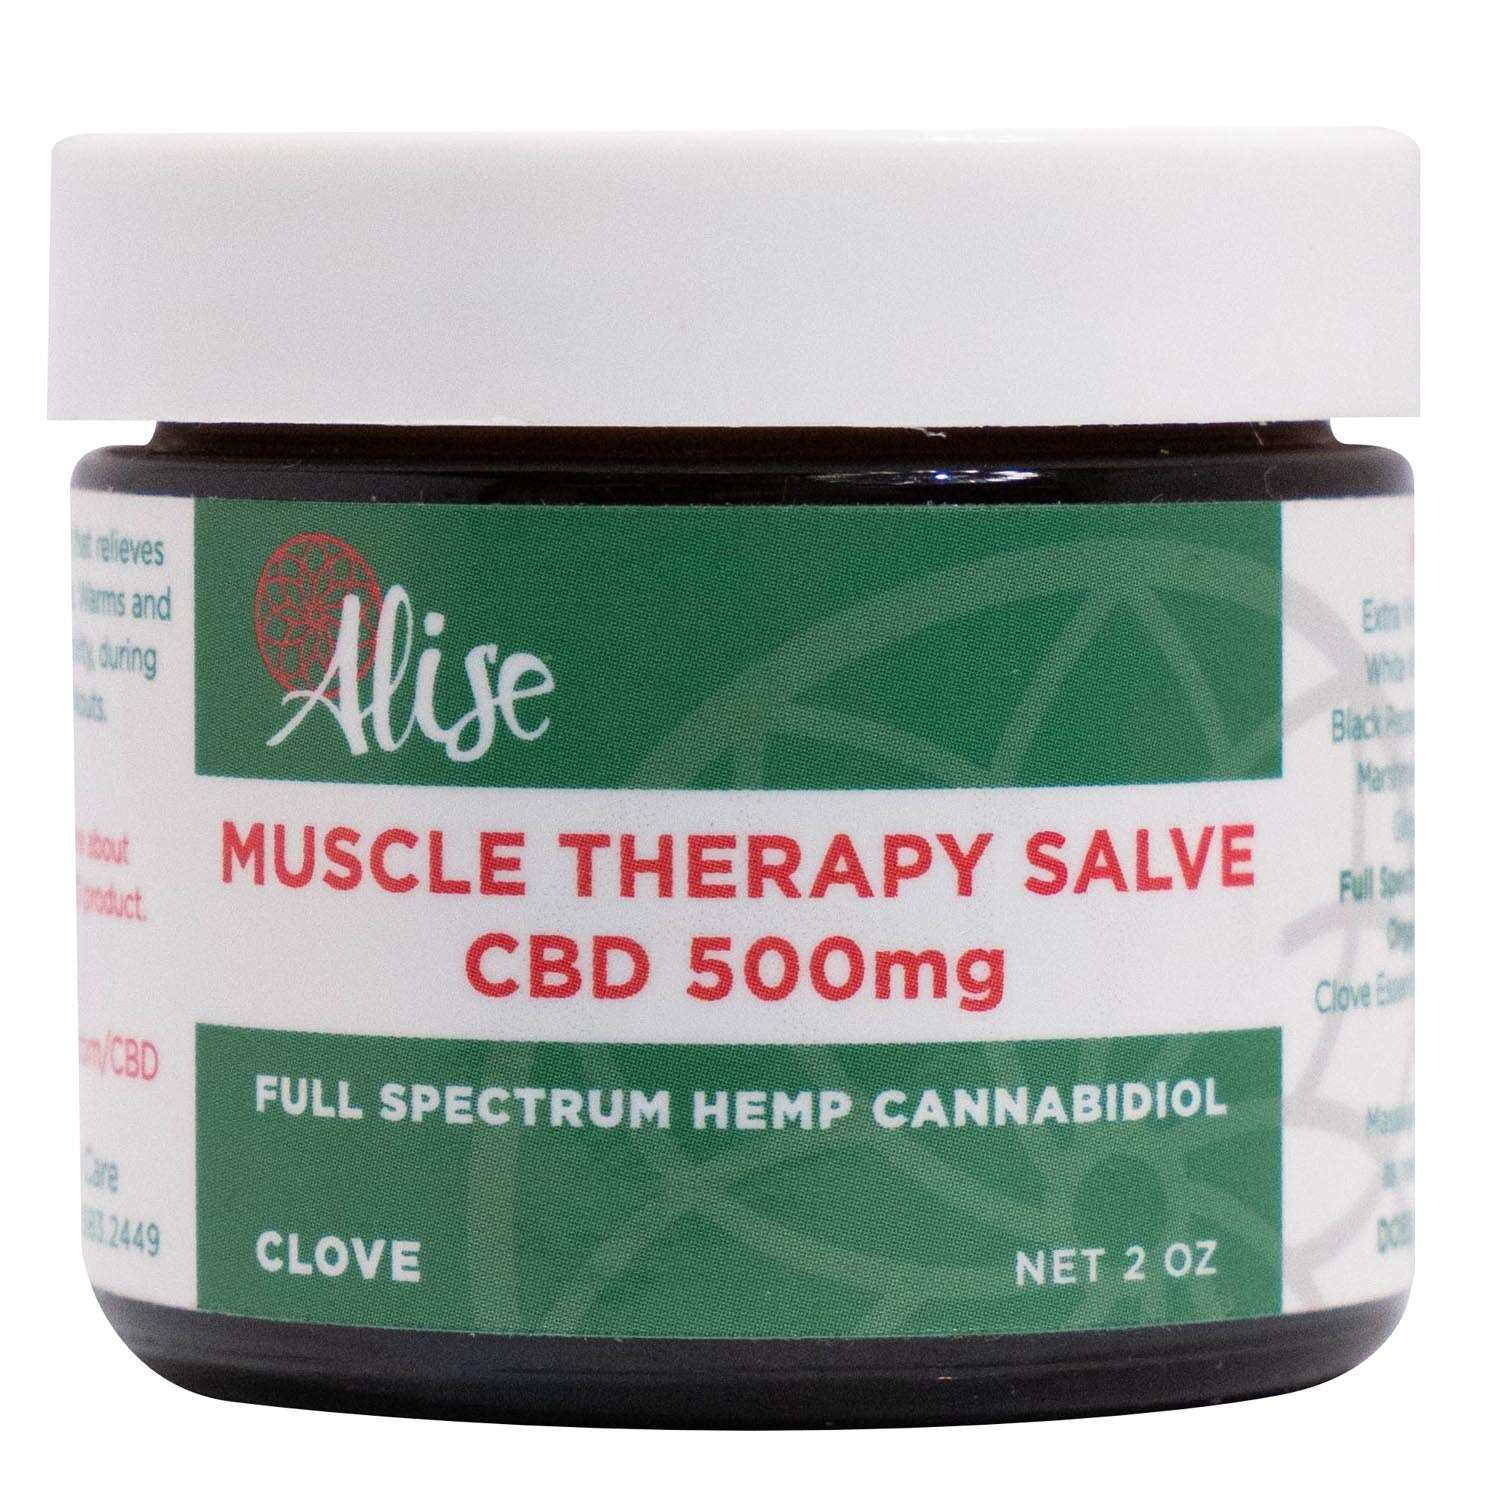 Muscle Therapy Salve CBD 500mg Warming Clove 2oz Jar handcrafted by Alise Body Care